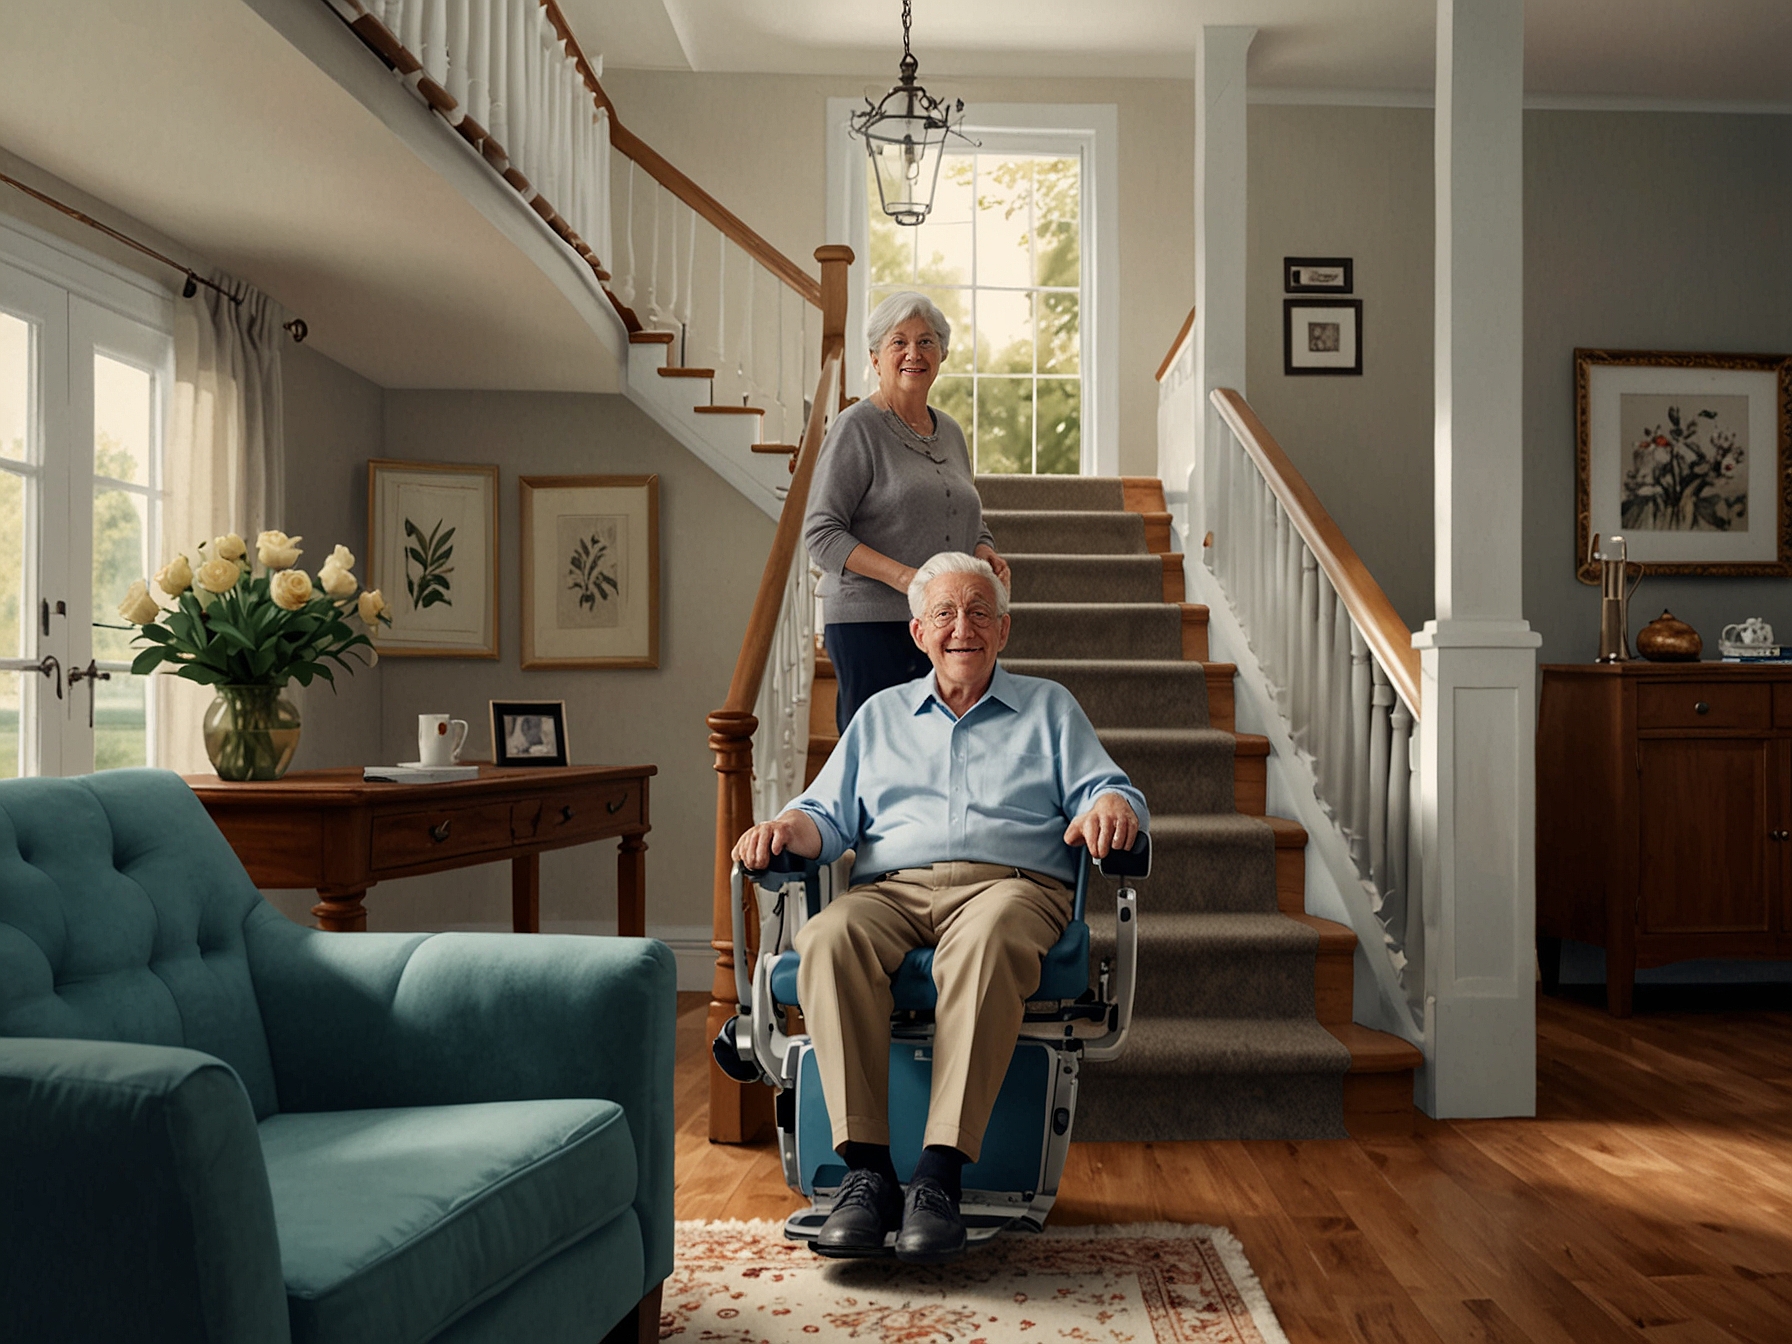 An elderly couple enjoying time in their living room, showcasing a stairlift installed along the staircase, emphasizing the importance of home modifications for aging in place.